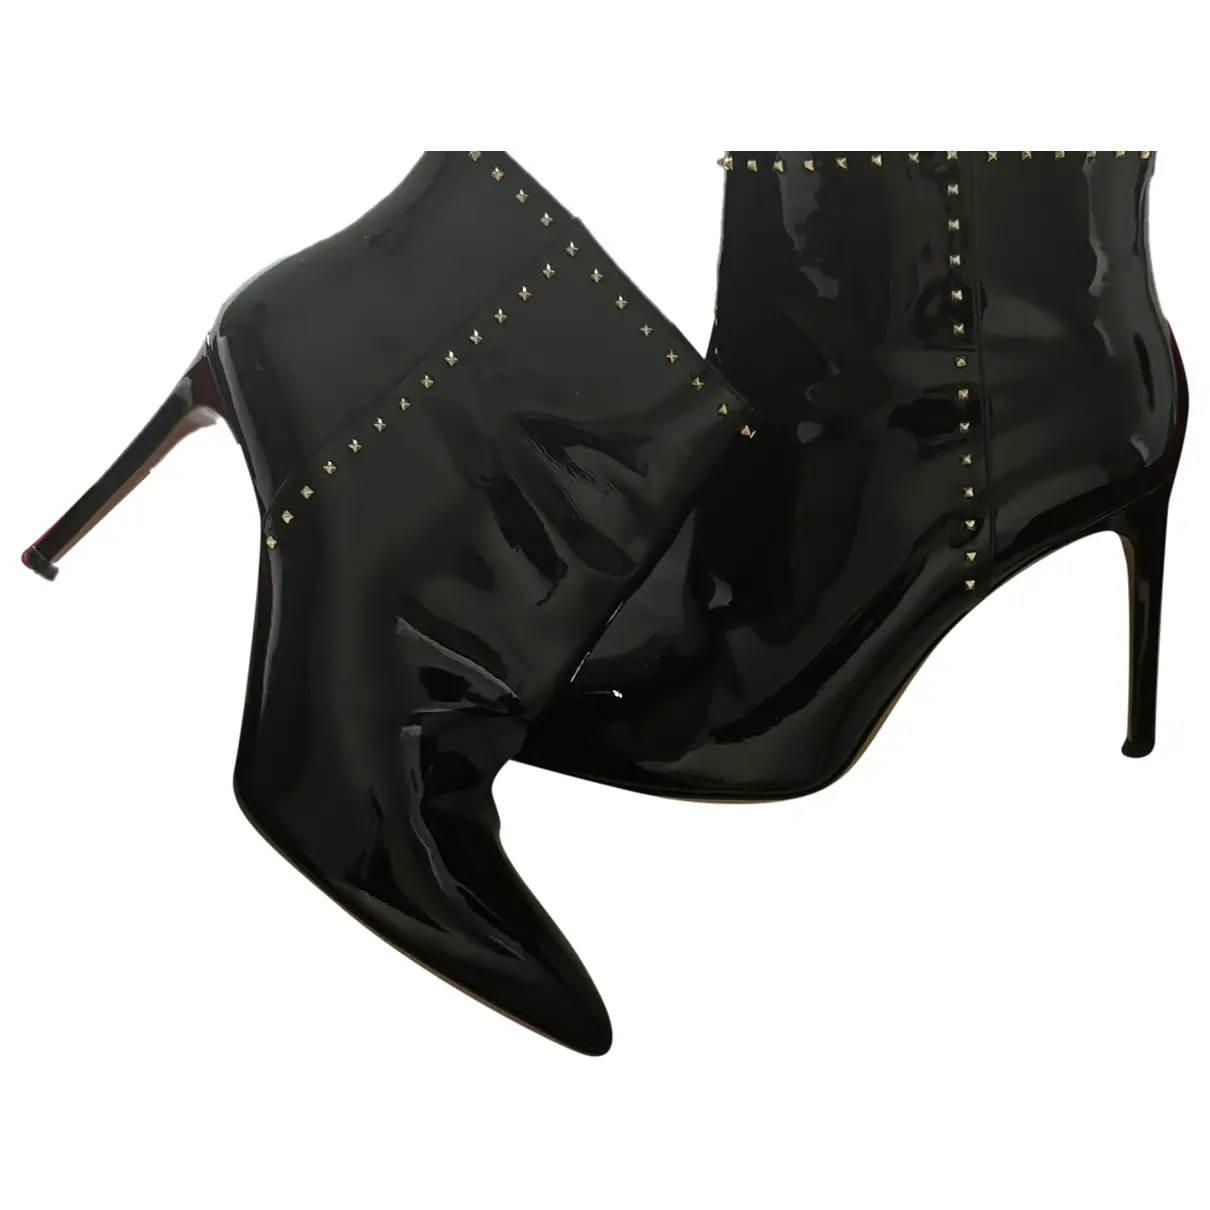 Rockstud patent leather boots